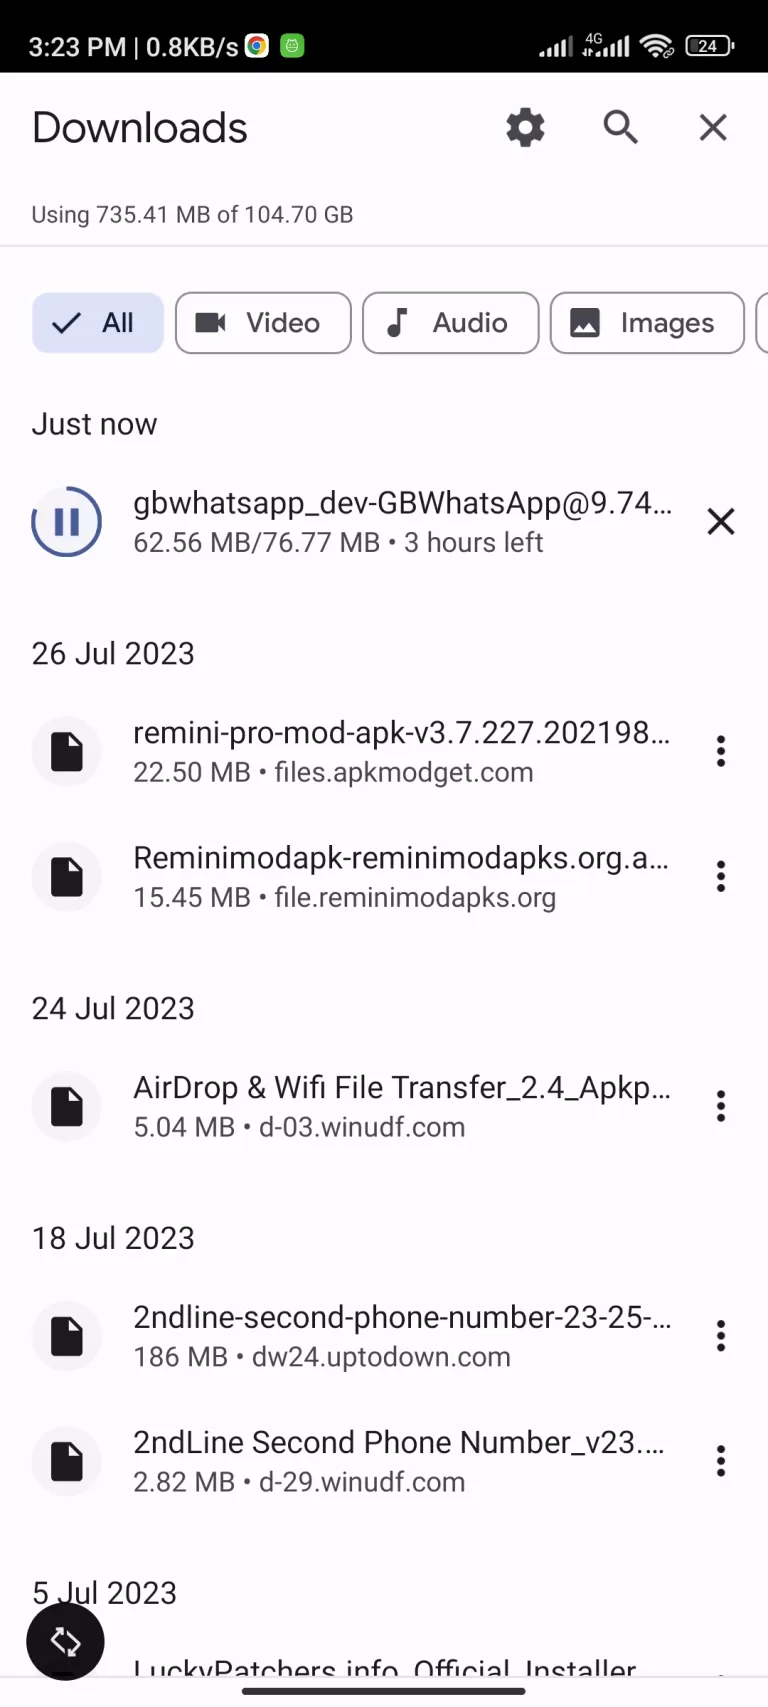 GBWhatsApp Old Version APK Download Anti-Ban Official (All Versions)